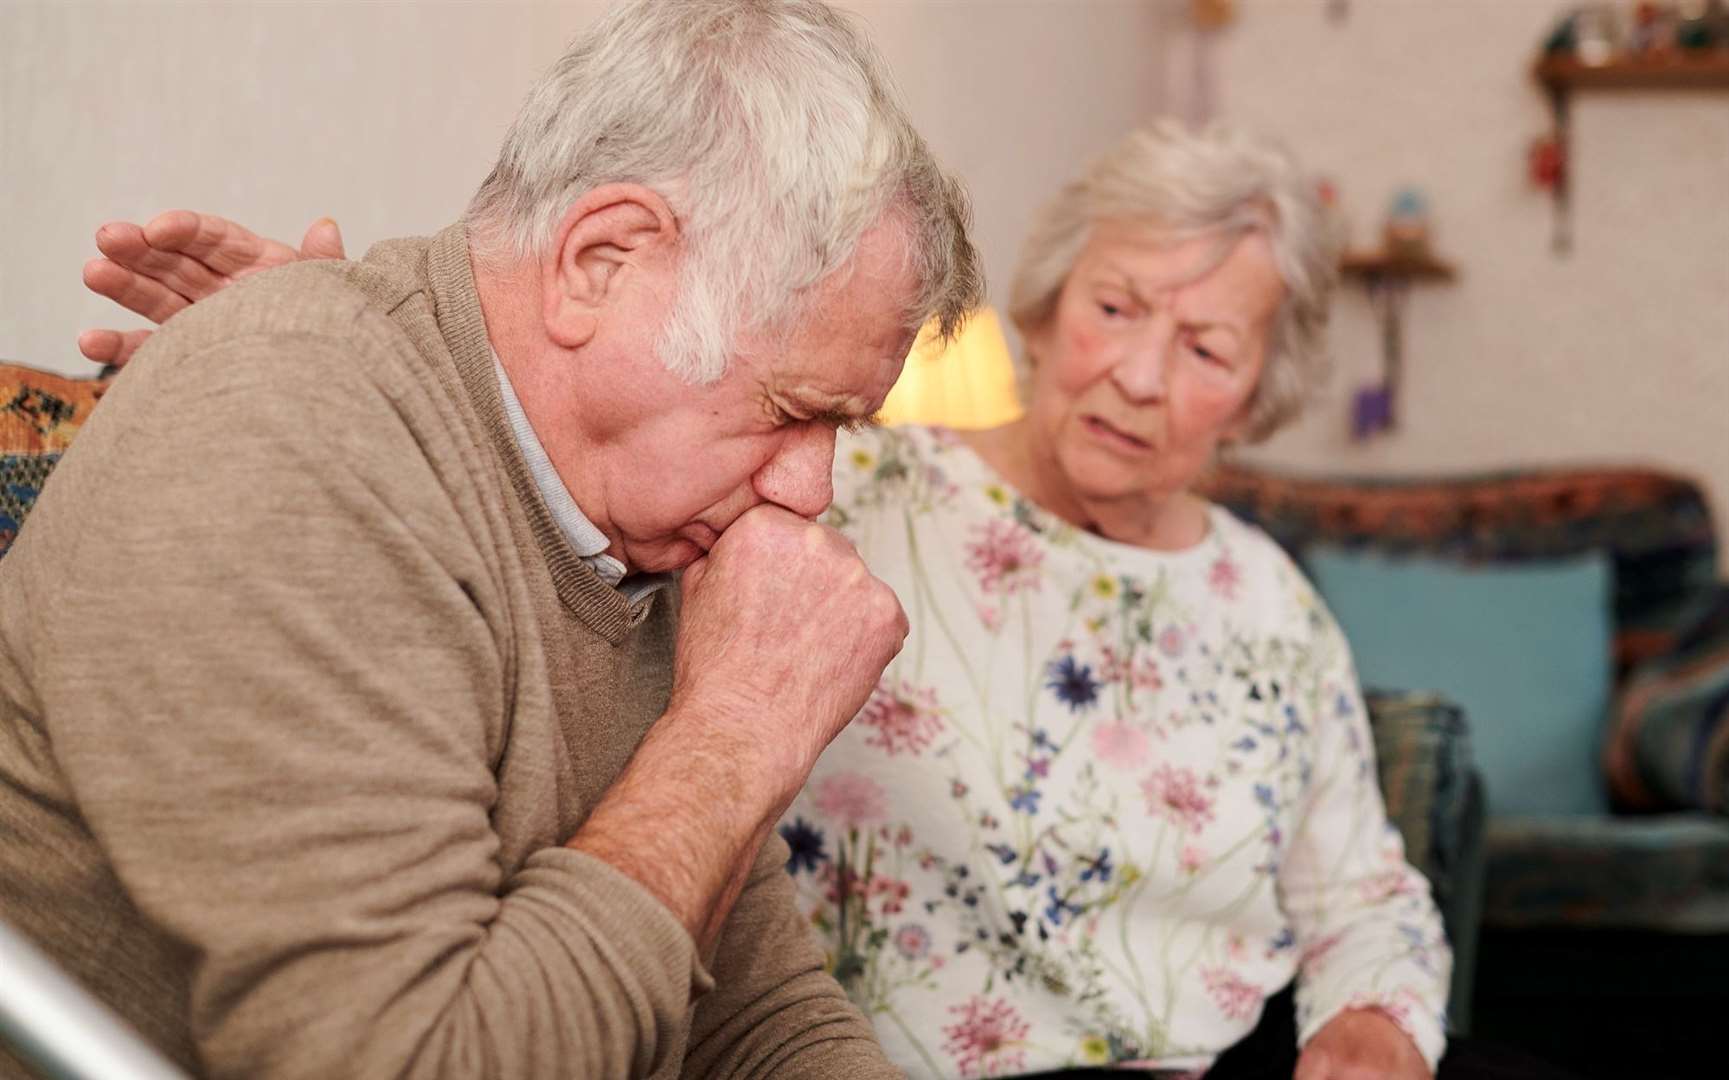 The cough may last for several weeks or months. Image: iStock.